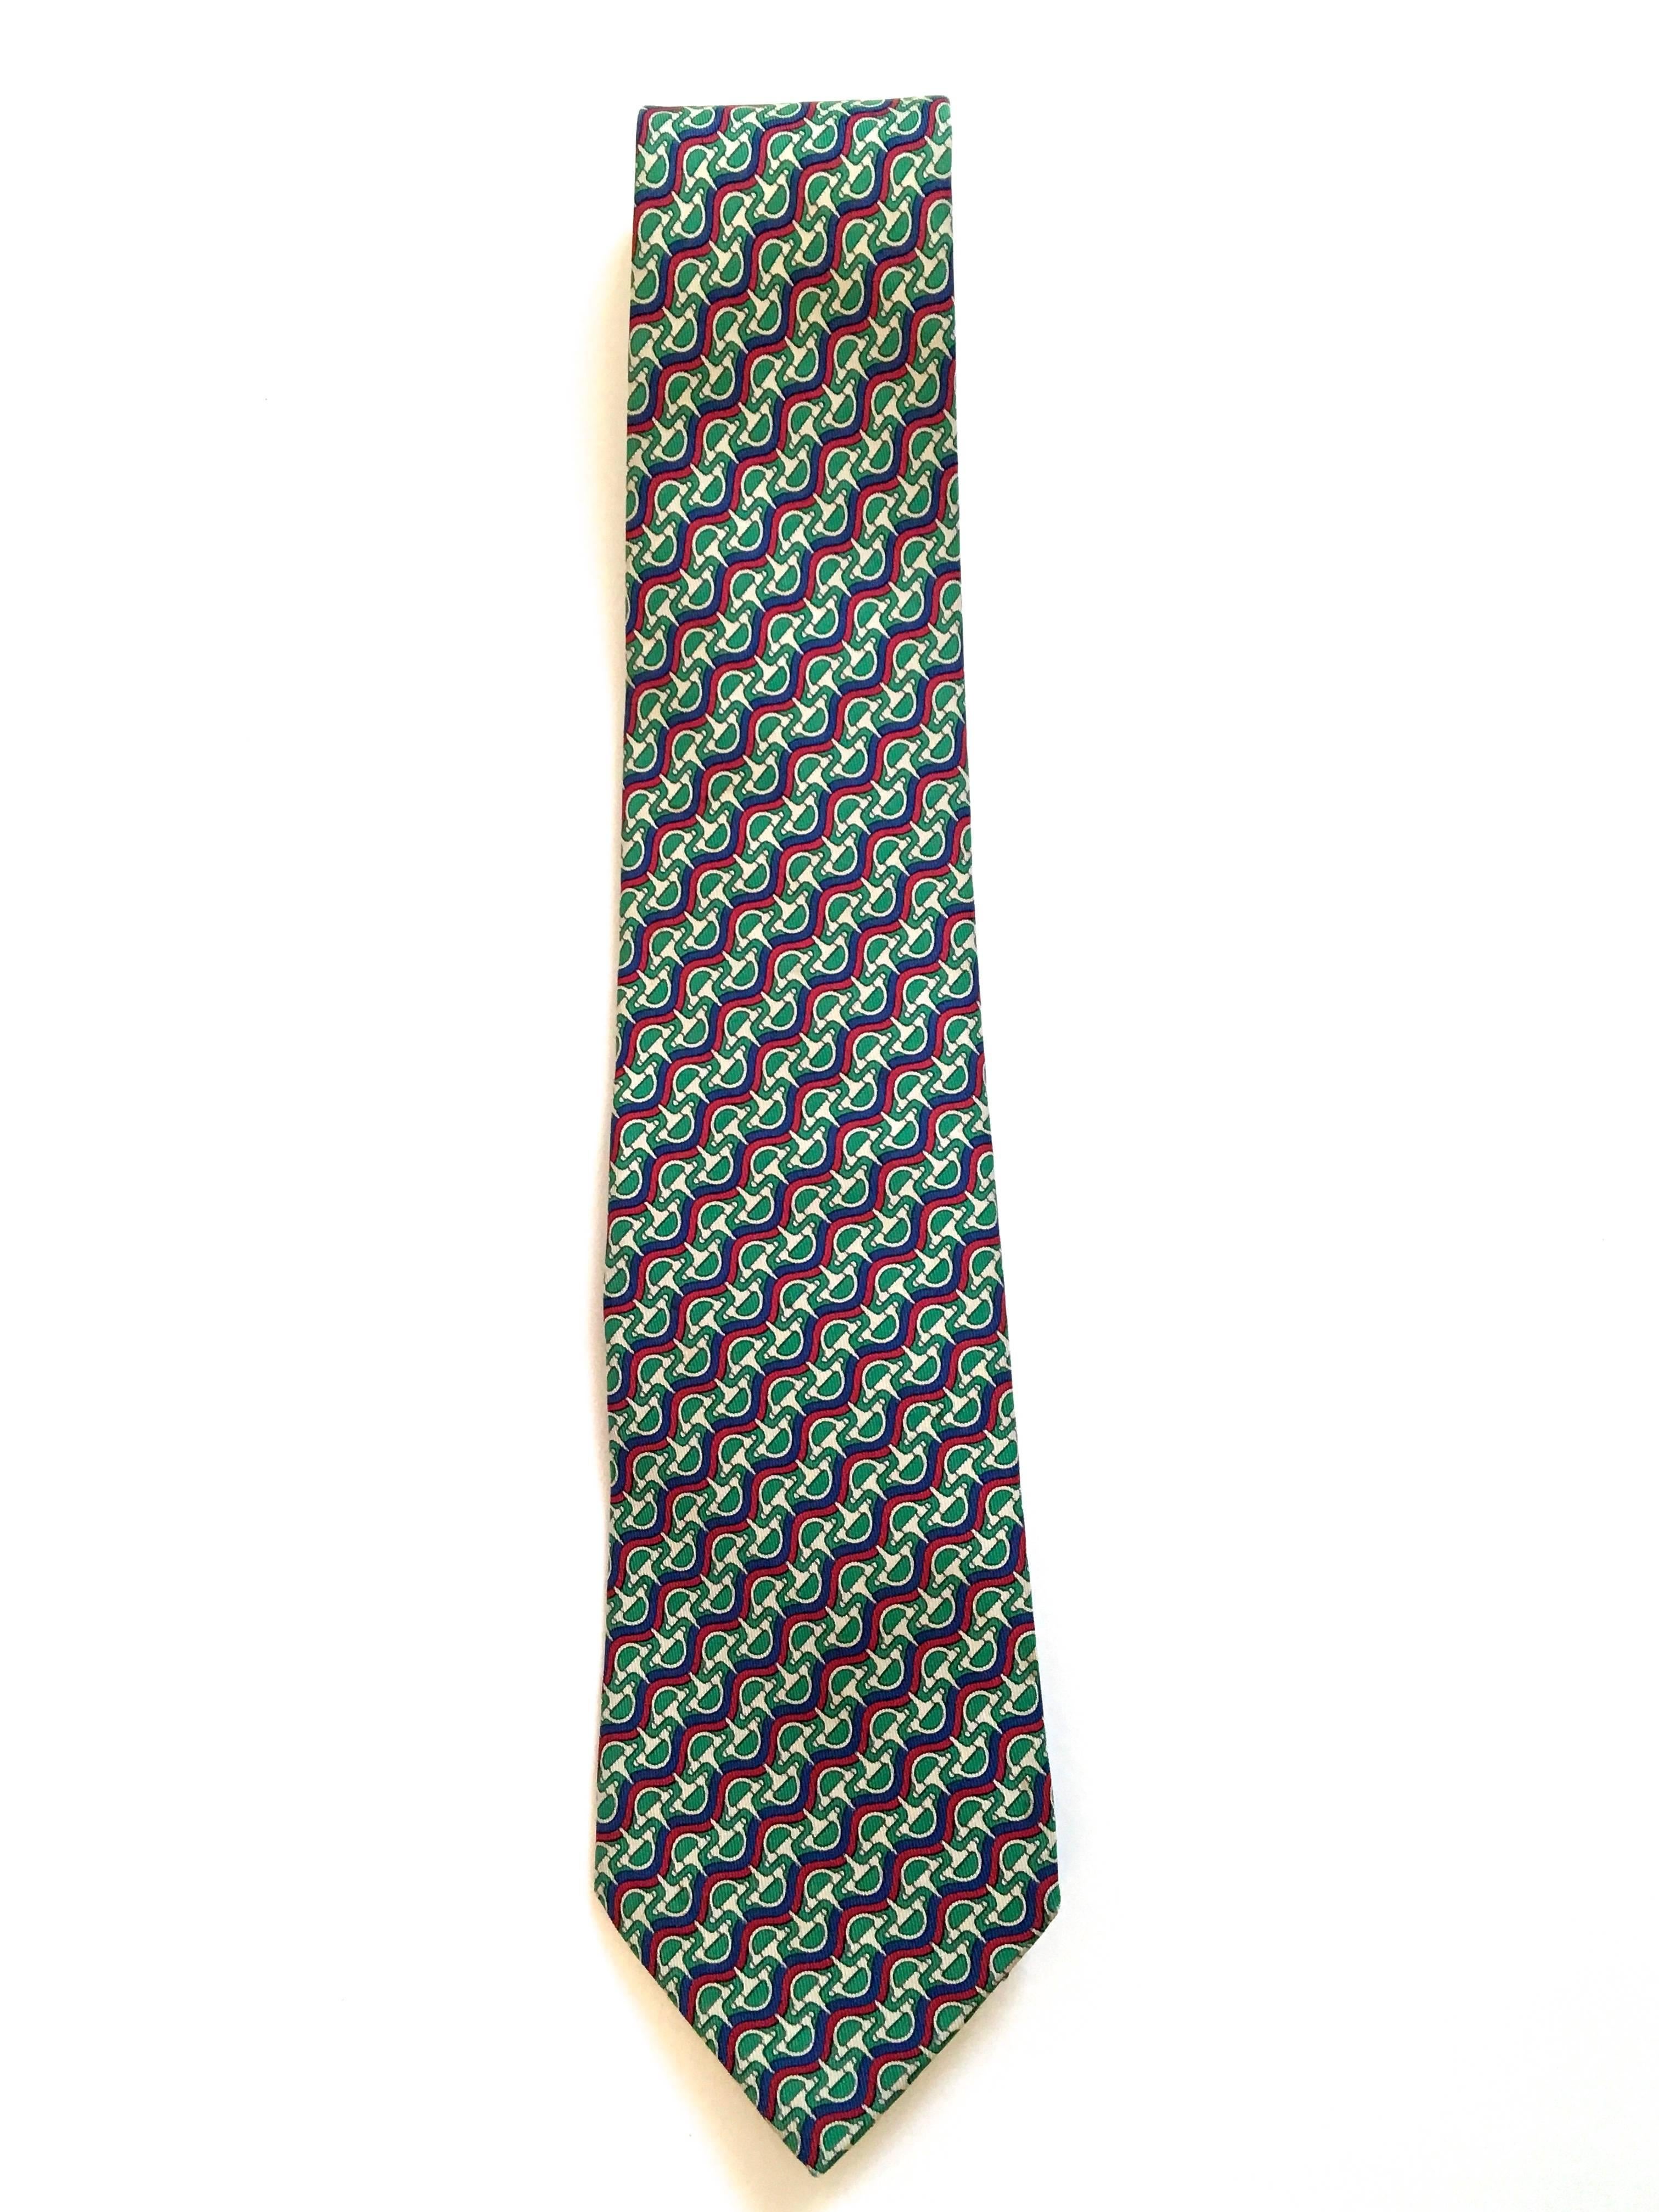 Presented here is a silk necktie from Hermes Paris. The tie is comprised of colors of red, green, gray and blue. The design is a tessellation of horse bits in a beautiful geometric pattern. The combination of discrete shapes and colors make for a